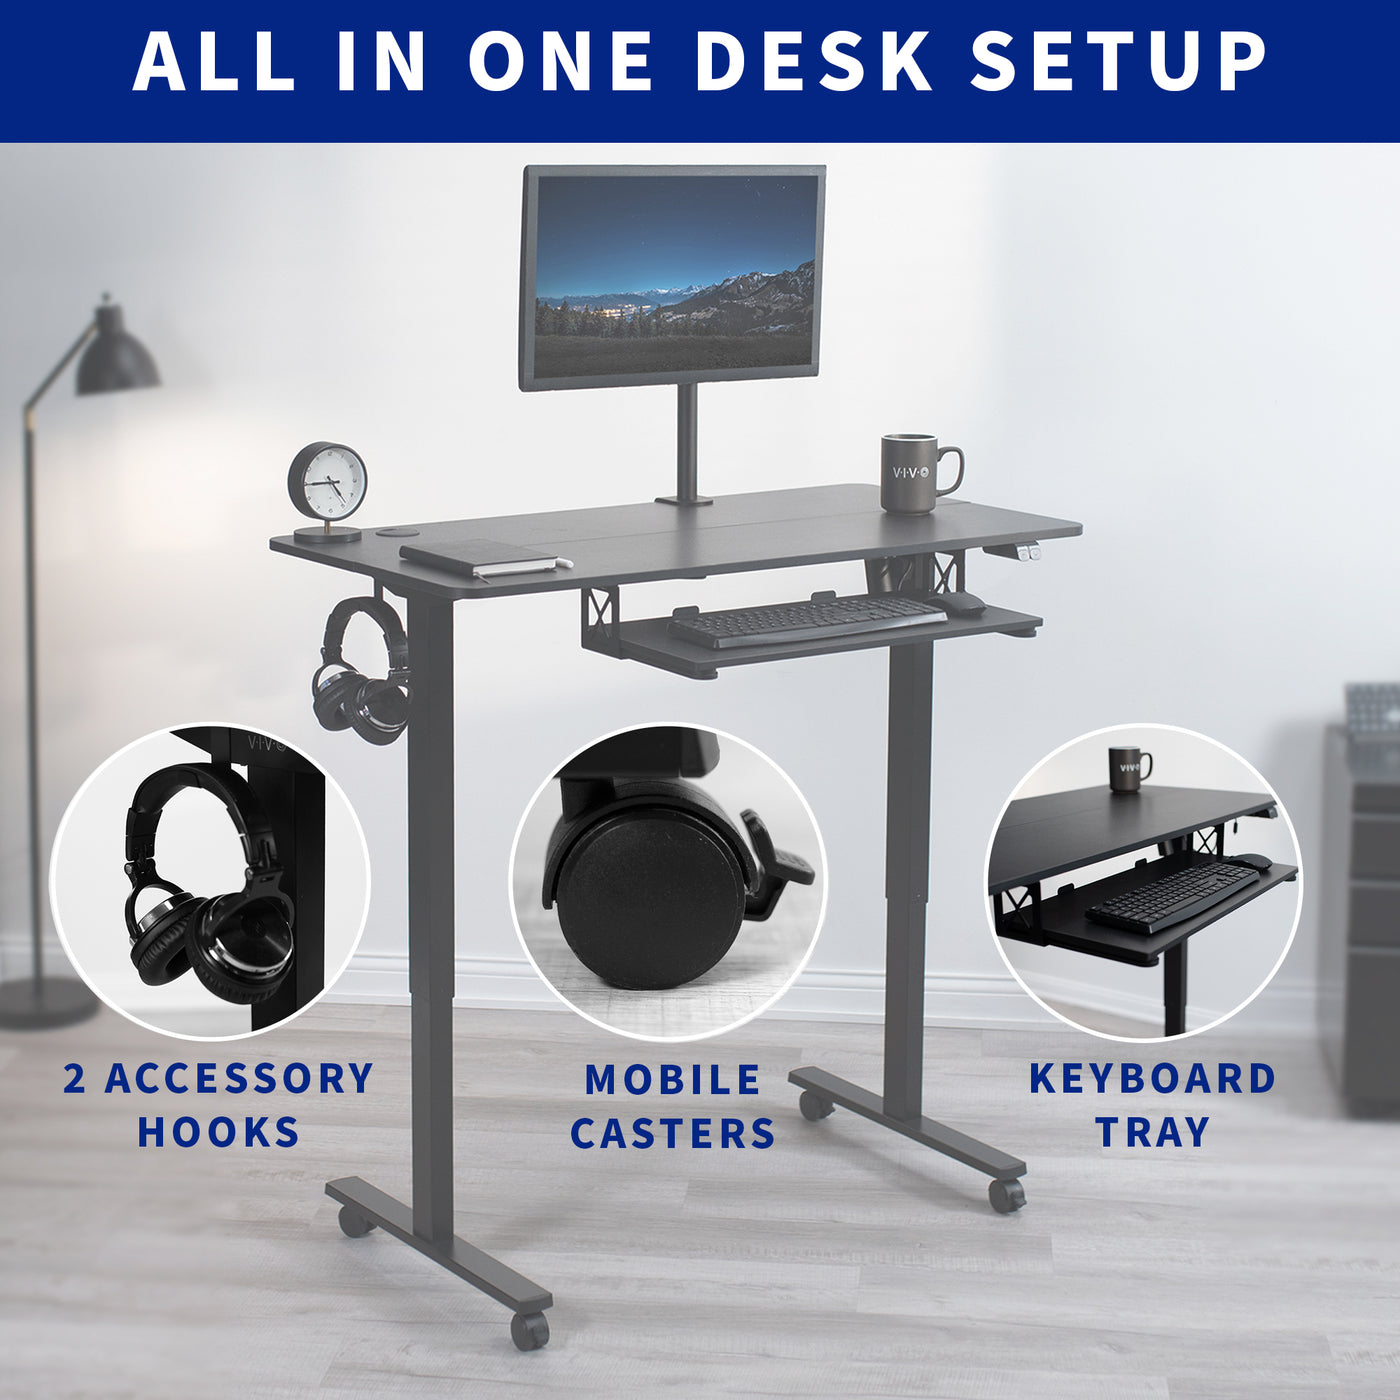 Desk includes two accessory hooks, mobile caster wheels, and a keyboard tray.